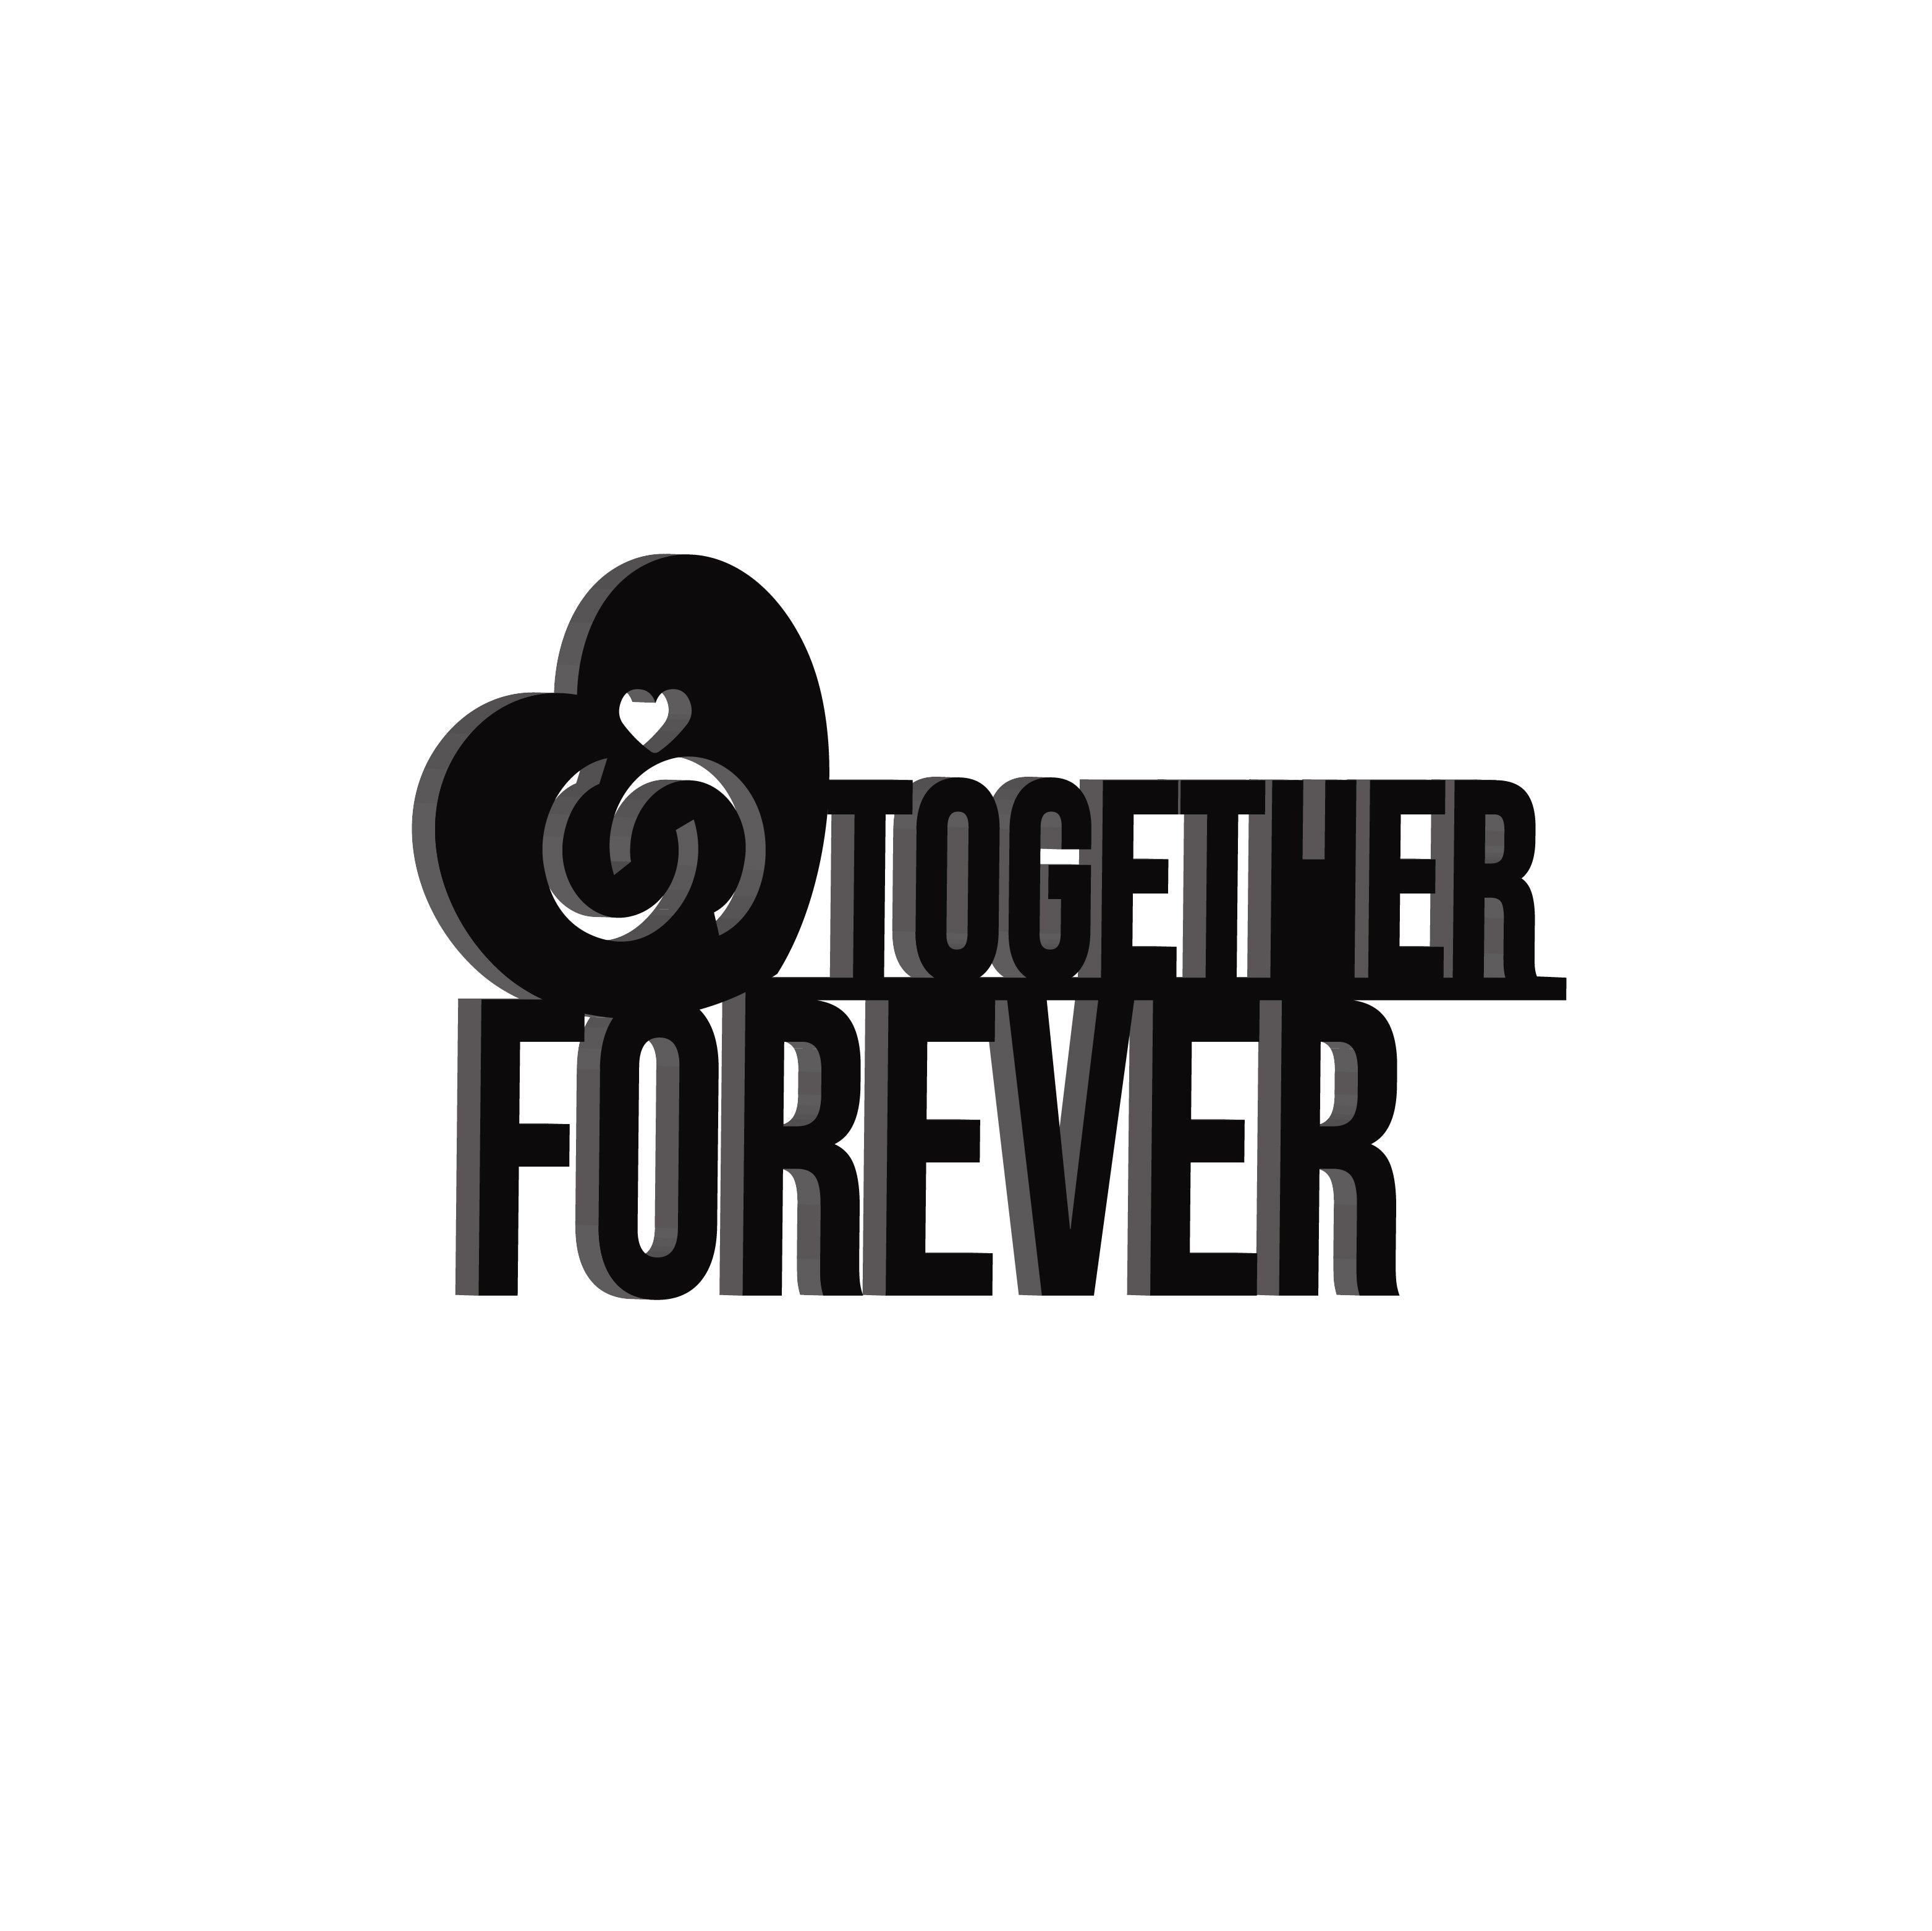 "Together Forever with Love band" Black Engineered Wood Wall Art Cutout, Ready to Hang Home Decor 4